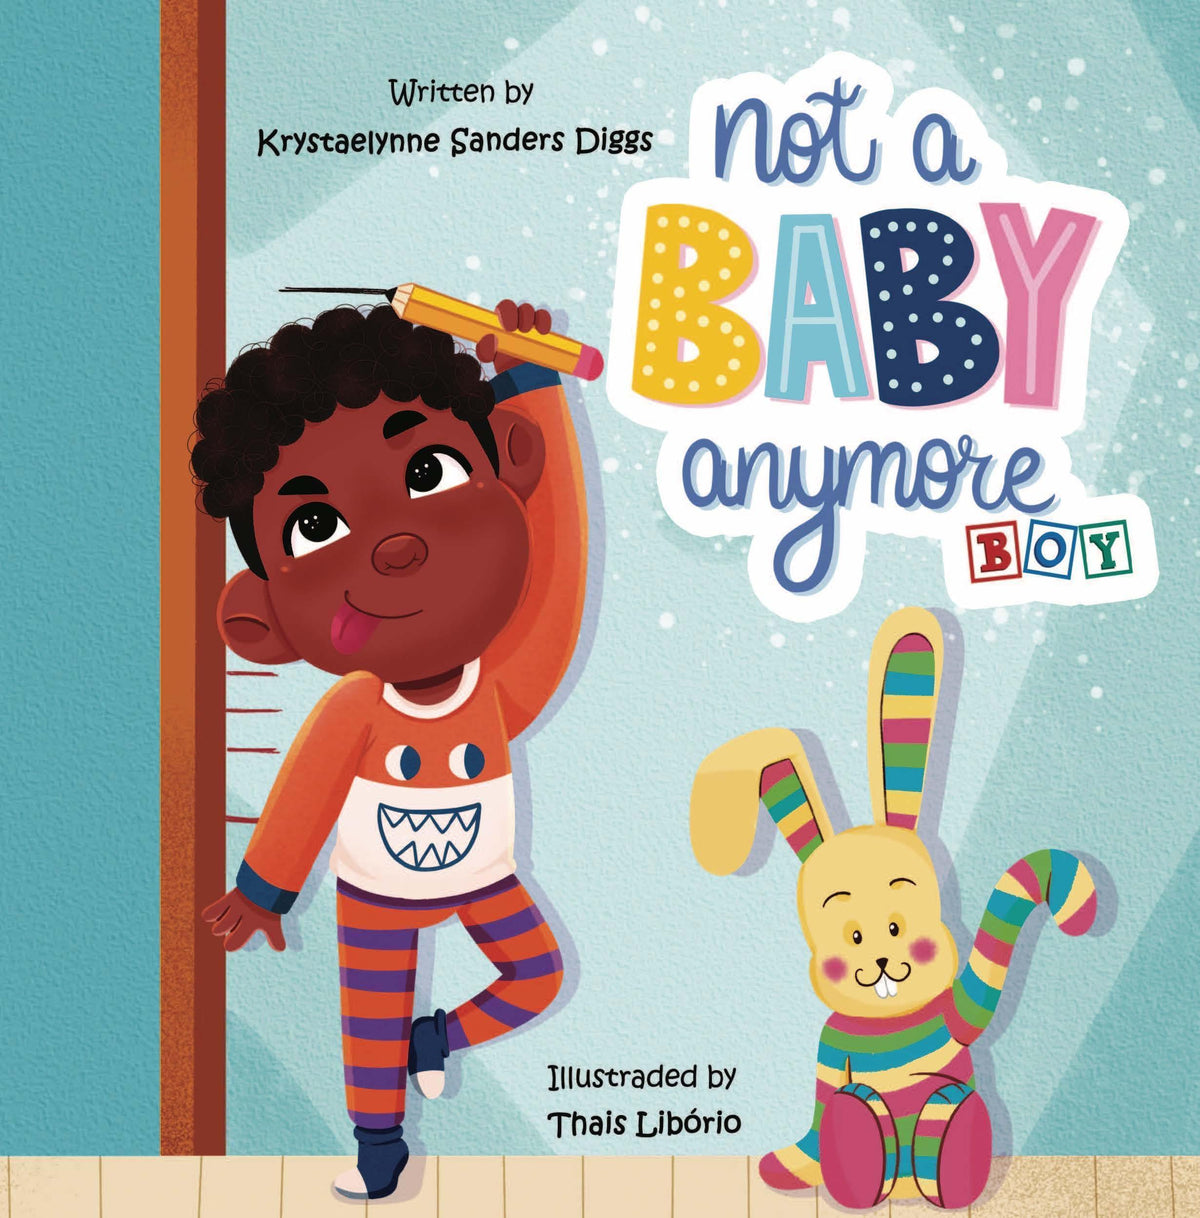 Not A Baby Anymore (Boy) - Author Krystaelynne Sanders Diggs [Body Safety]